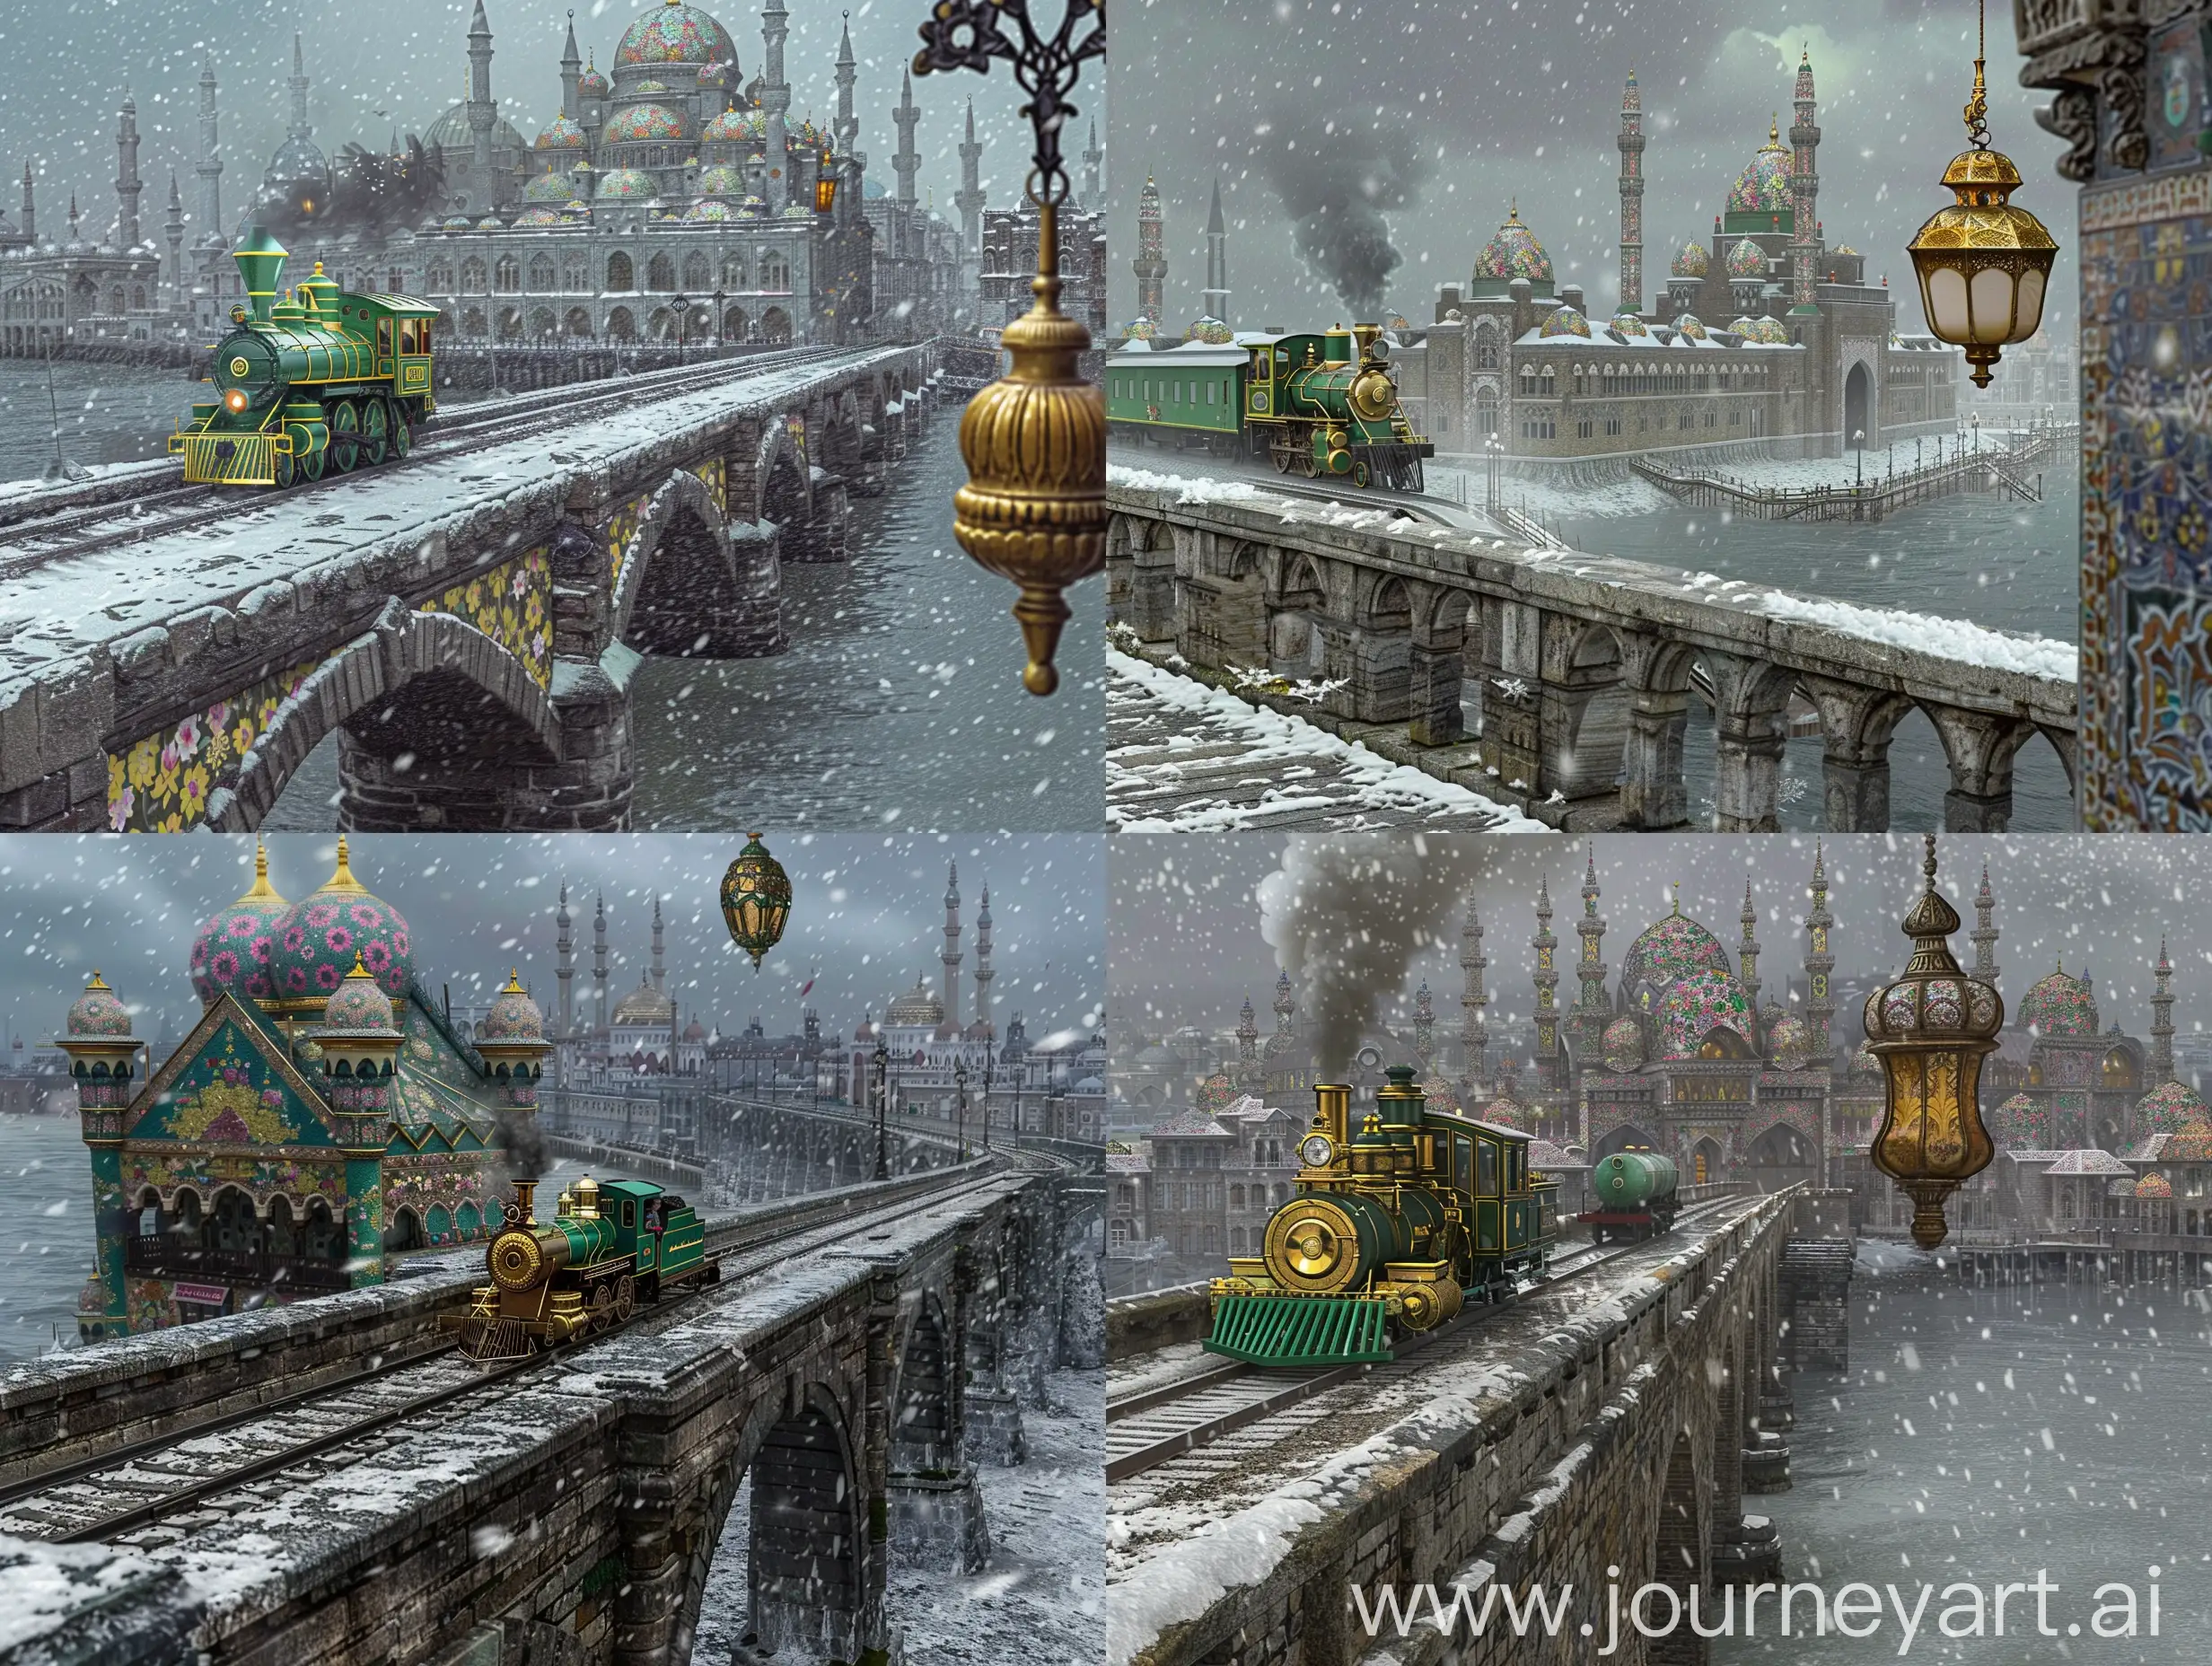 Majestic-PersianInspired-Stonebridge-and-Golden-Steam-Train-Amidst-a-Snowfall-in-a-LondonStyled-City